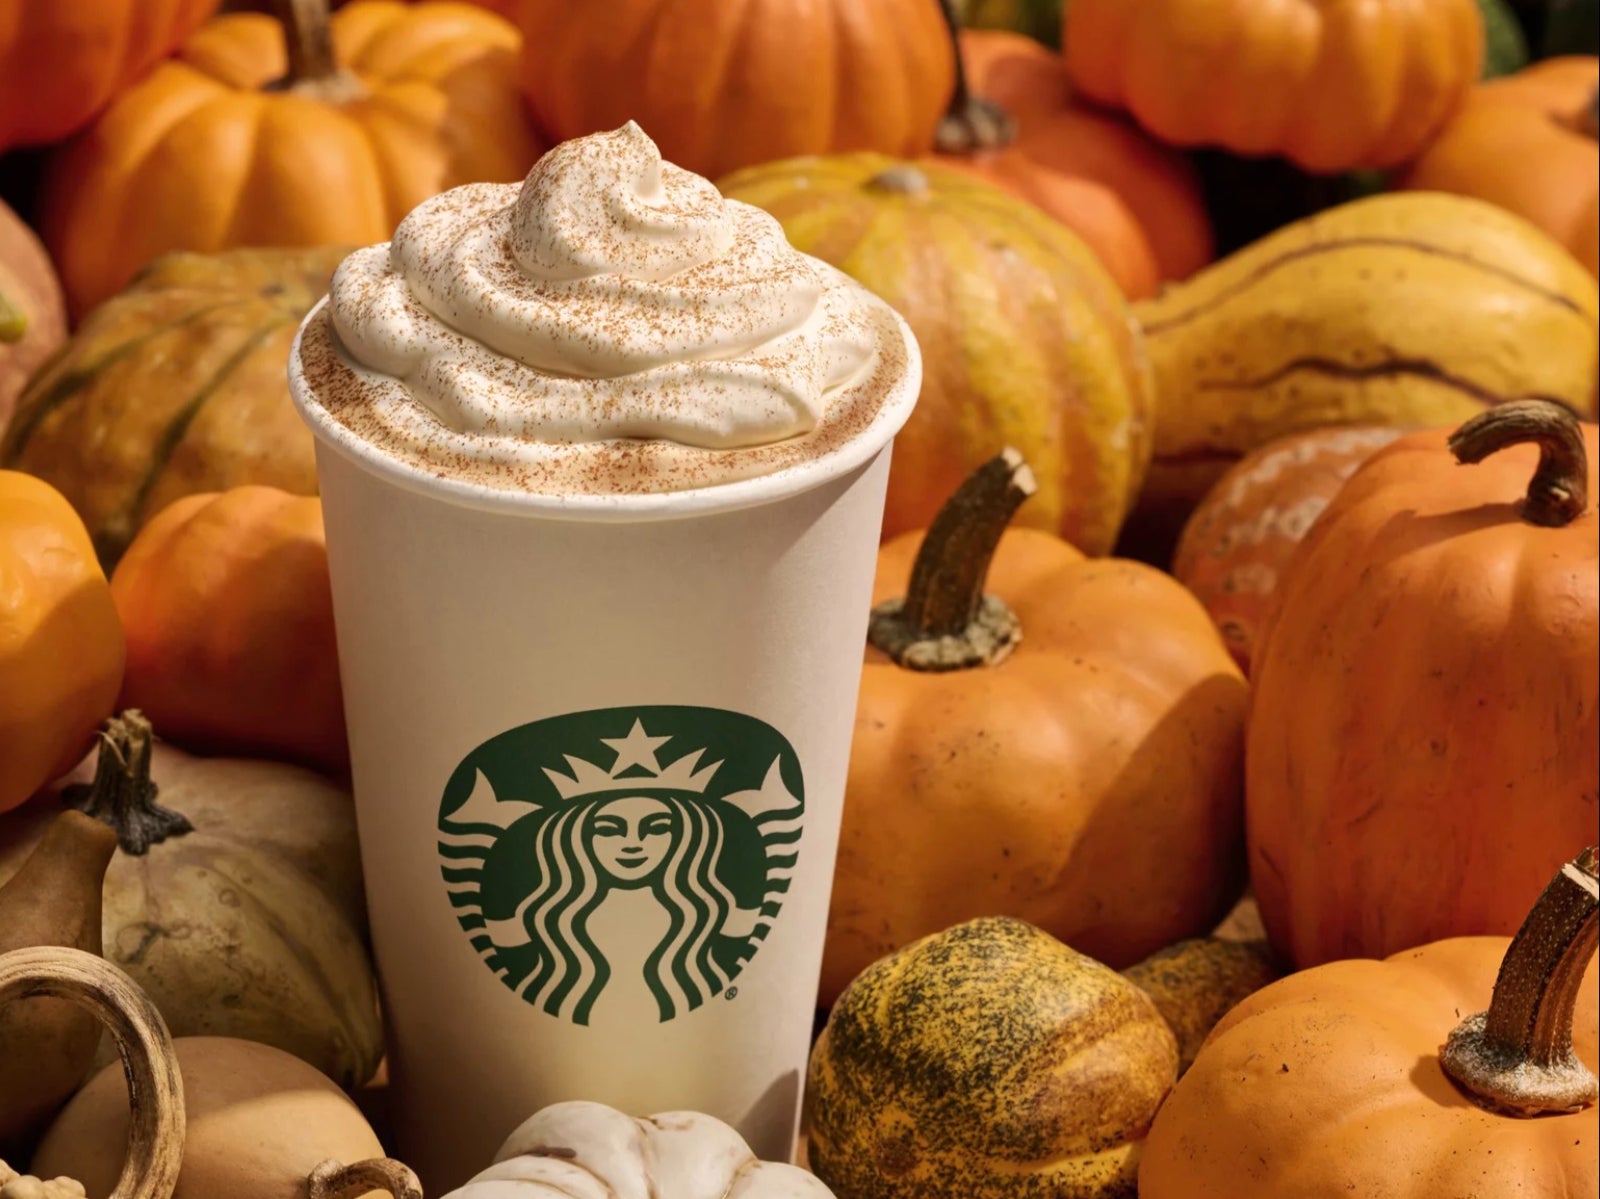 Starbucks releases new fall menu with two brandnew drinks ‘Pure joy’